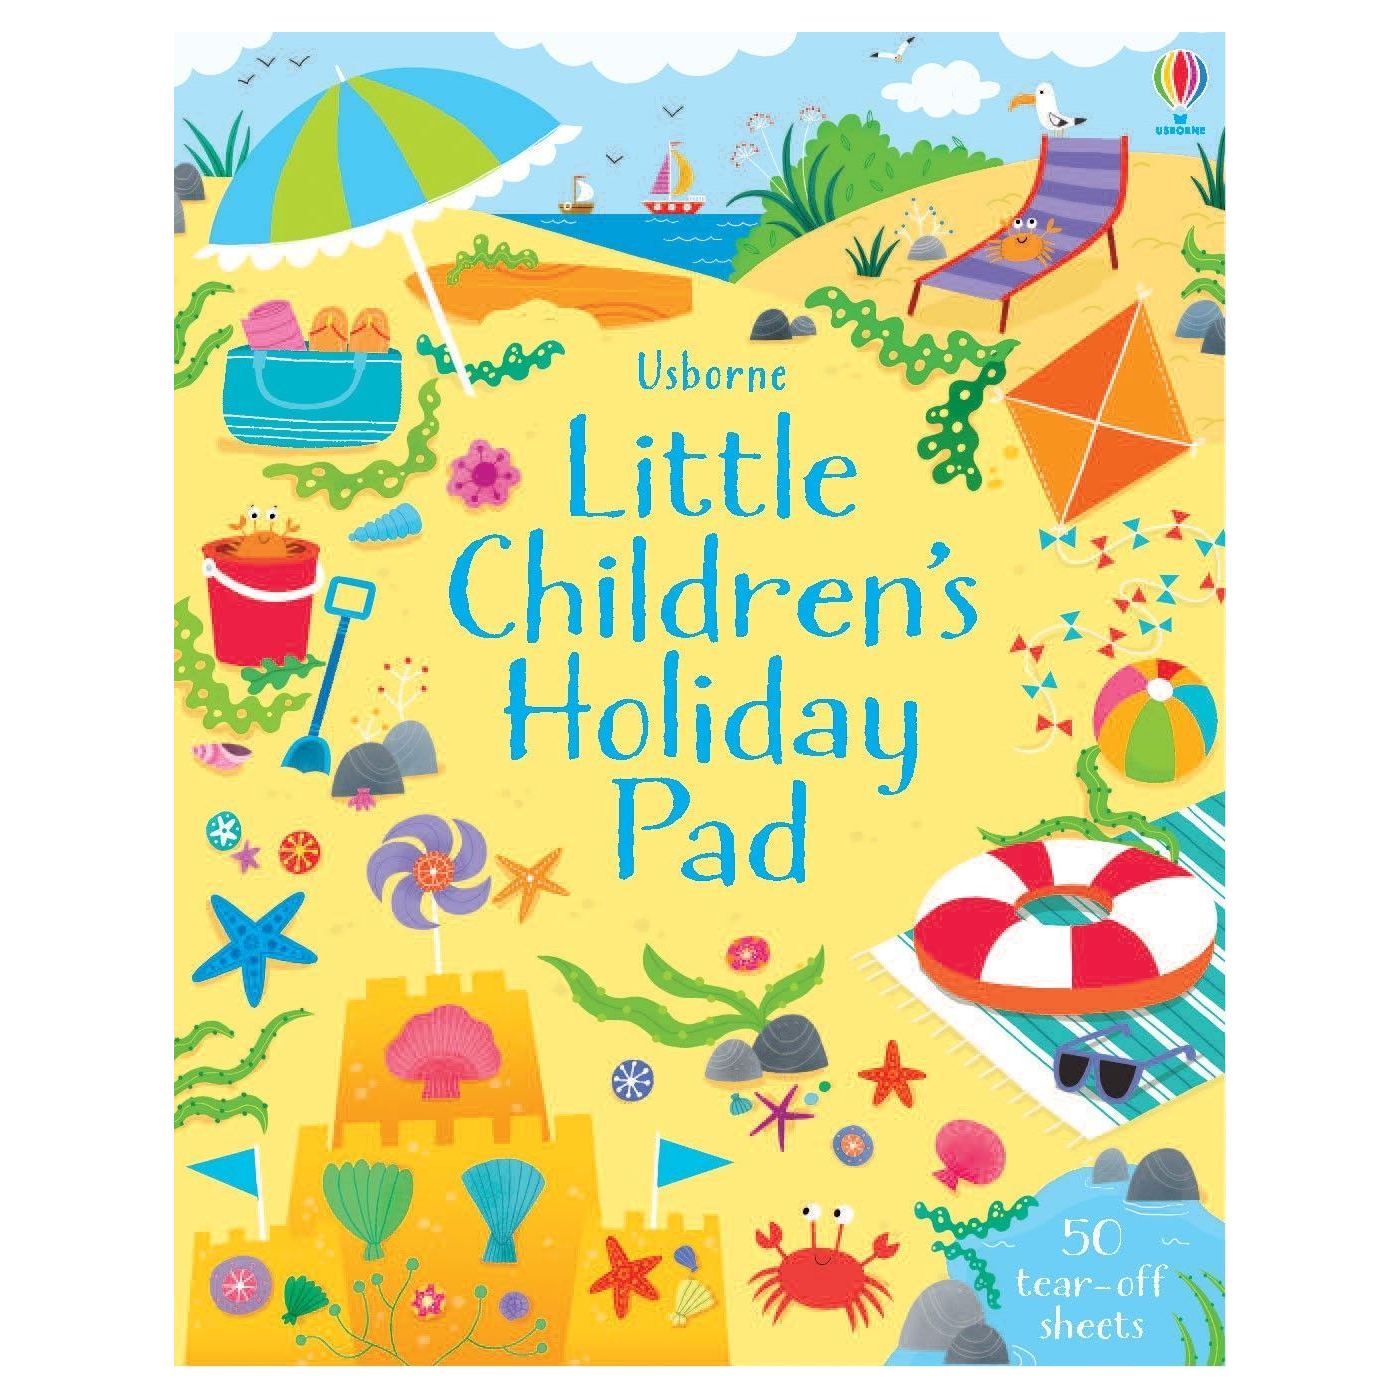  Little Children's Holiday Pad